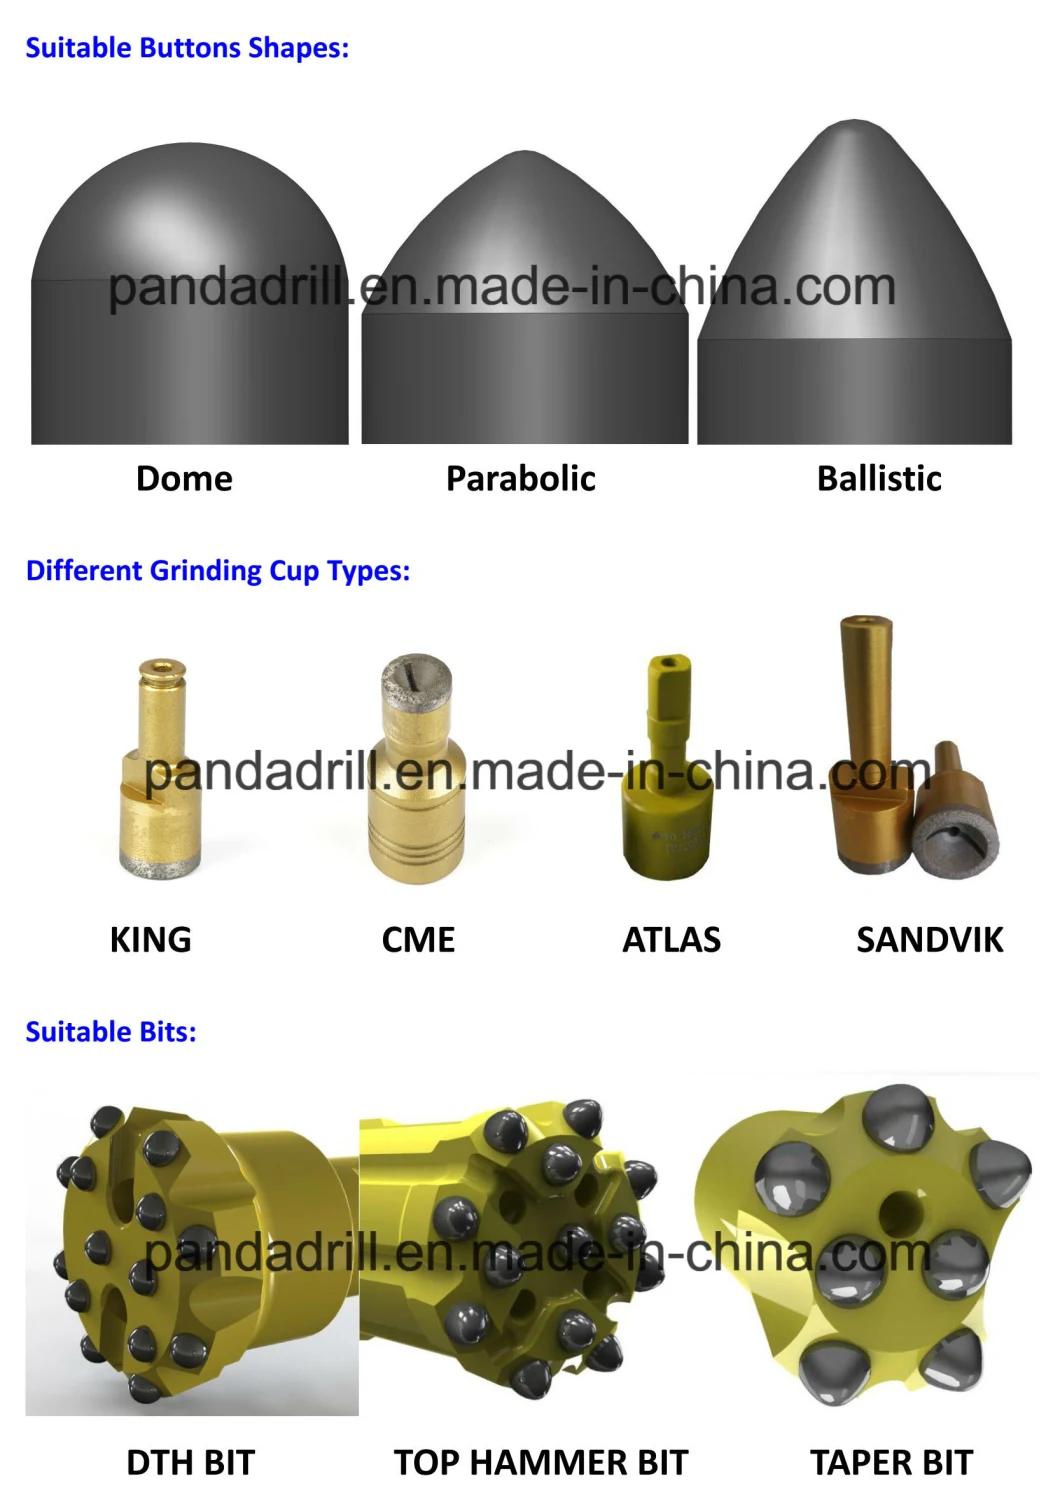 China Manufacture for DTH Button Bit Grinding Cup with Low Price